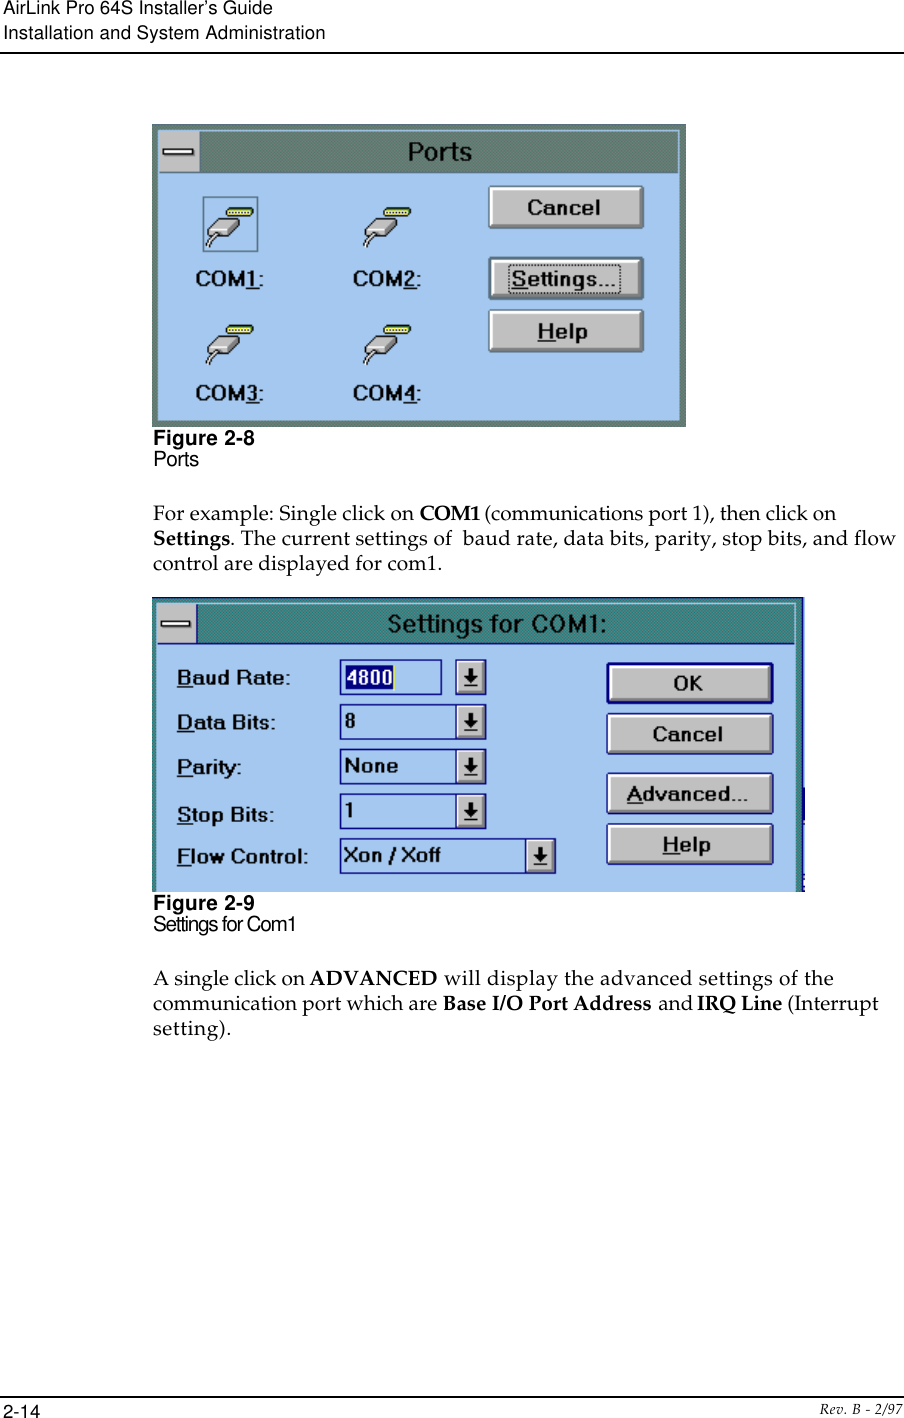 AirLink Pro 64S Installer’s GuideInstallation and System AdministrationRev. B - 2/972-14Figure 2-8PortsFor example: Single click on COM1 (communications port 1), then click onSettings. The current settings of  baud rate, data bits, parity, stop bits, and flowcontrol are displayed for com1.Figure 2-9Settings for Com1A single click on ADVANCED will display the advanced settings of thecommunication port which are Base I/O Port Address and IRQ Line (Interruptsetting).